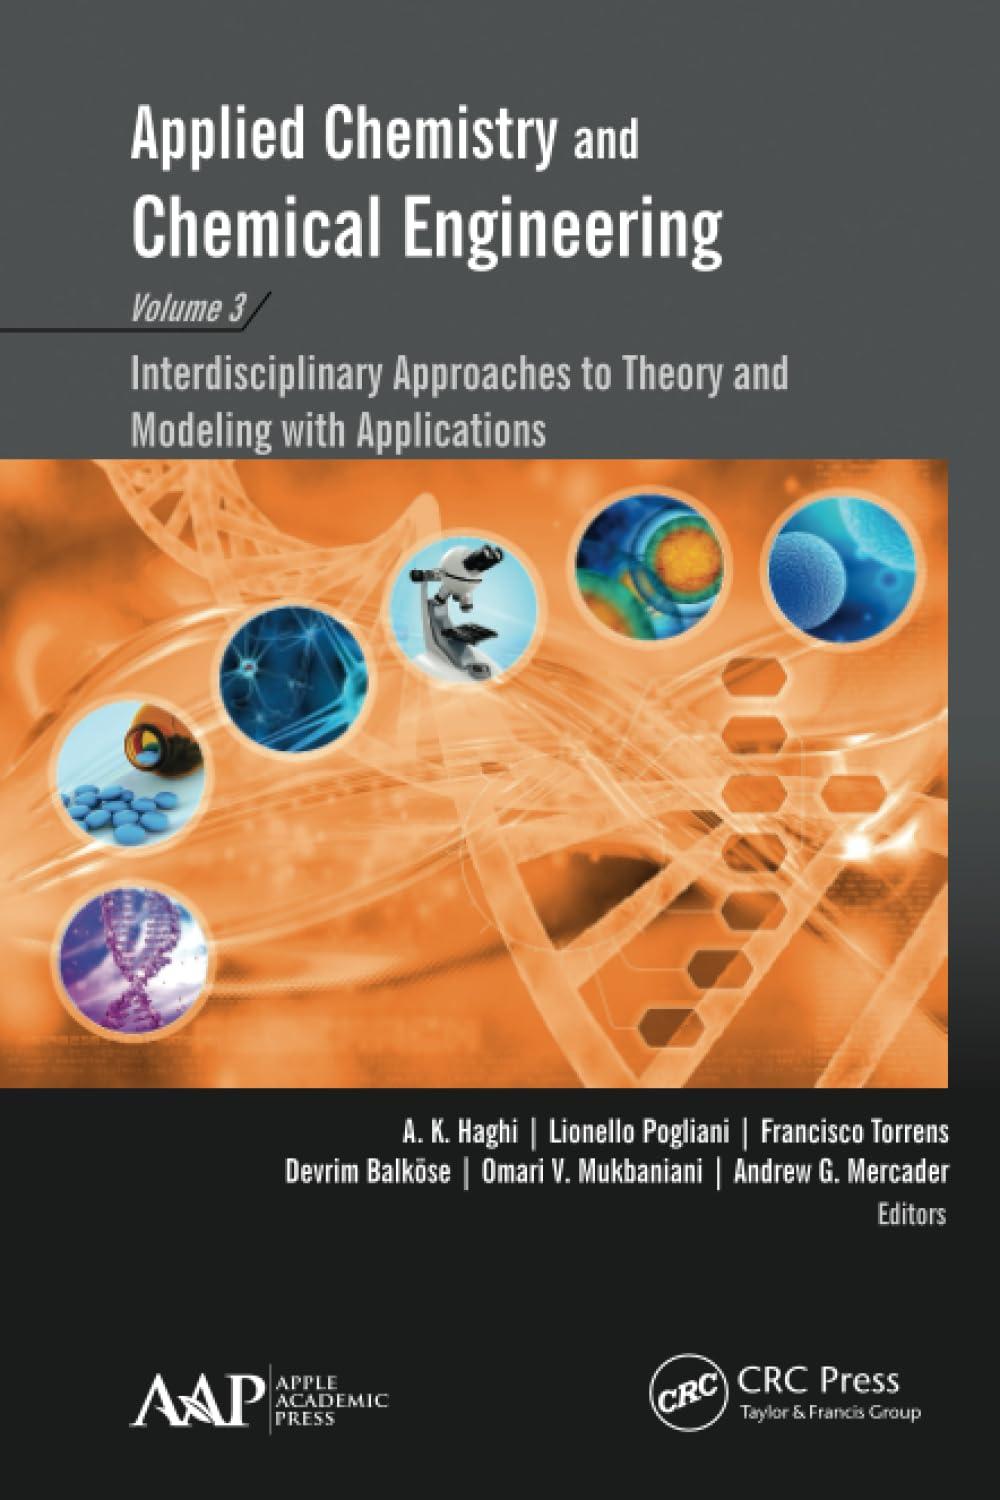 applied chemistry and chemical engineering volume 3  interdisciplinary approaches to theory and modeling with